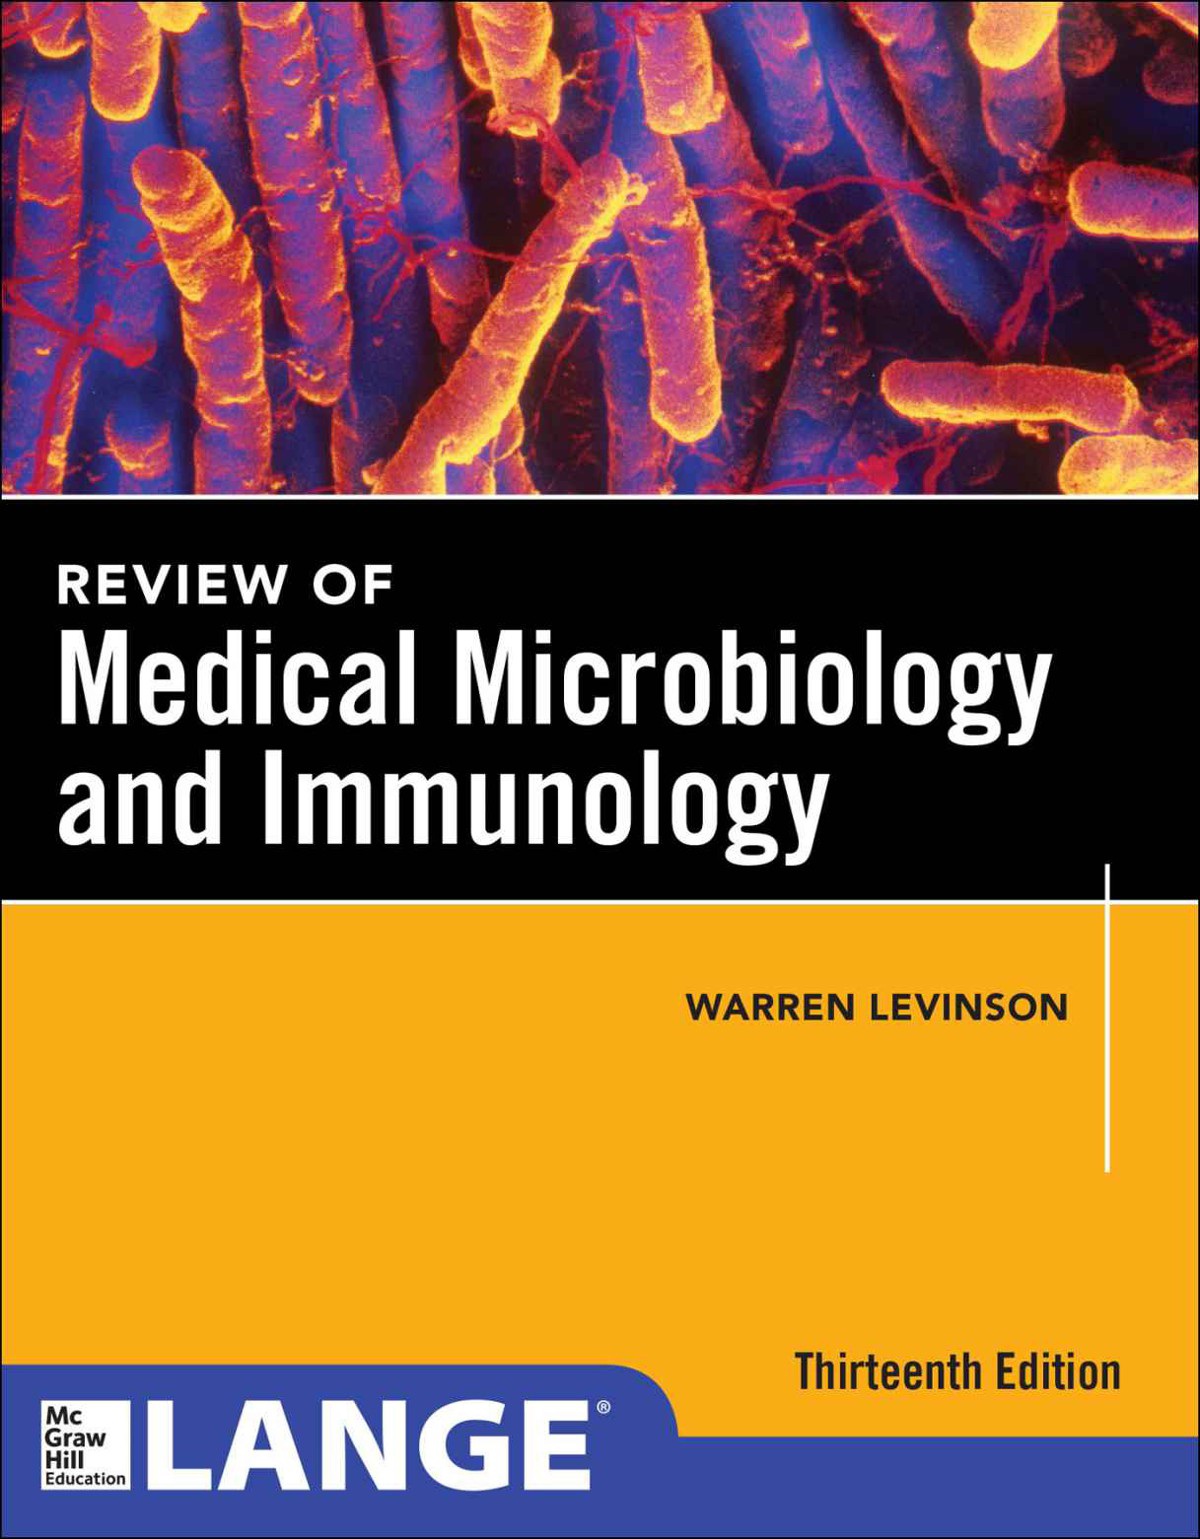 Recent thesis topics in medical microbiology